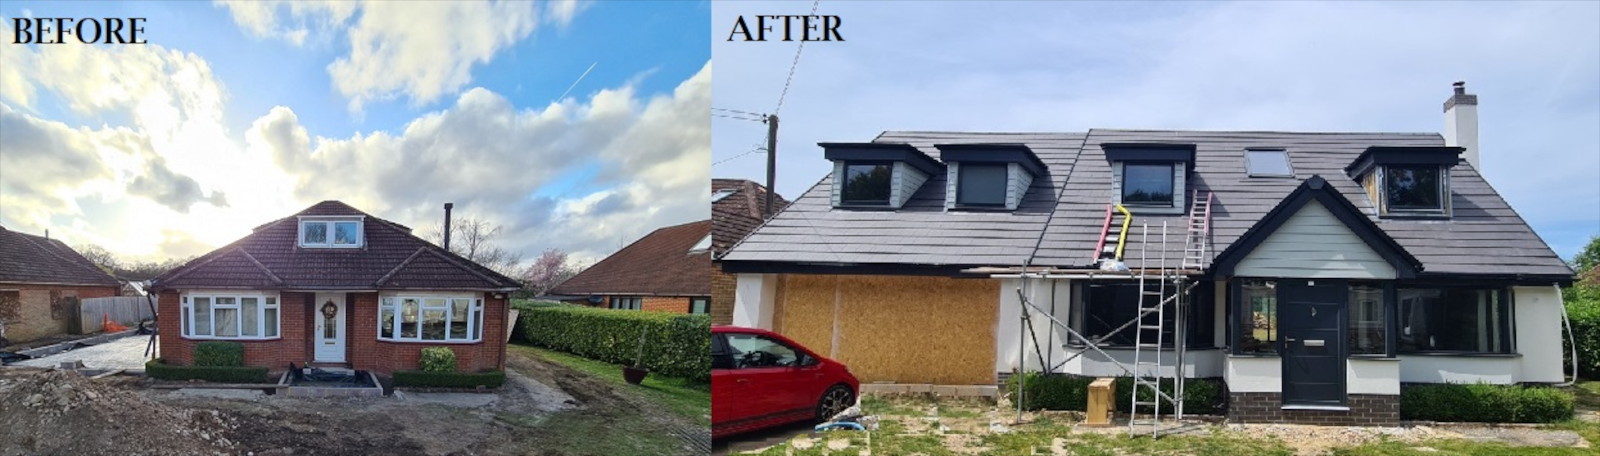 Before and After conversion photographs - Front Elevation